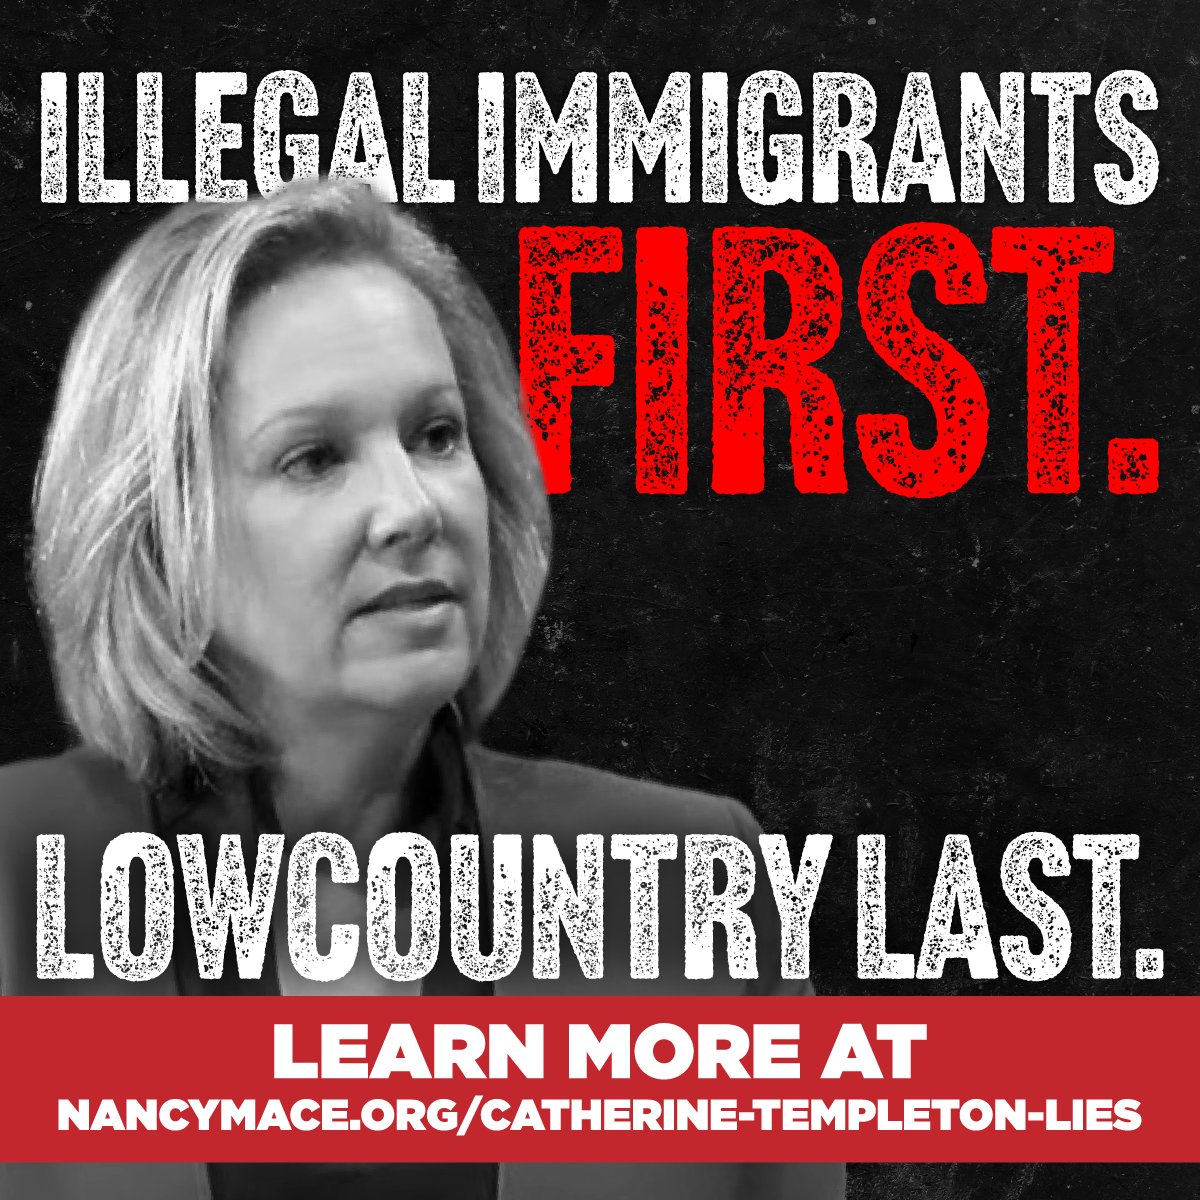 Our opponent gutted illegal immigration enforcement in South Carolina. Her record is clear, no matter how many times she lies. She CUT illegal immigration enforcement by 85% and the state’s budget from $2million almost down to $0.